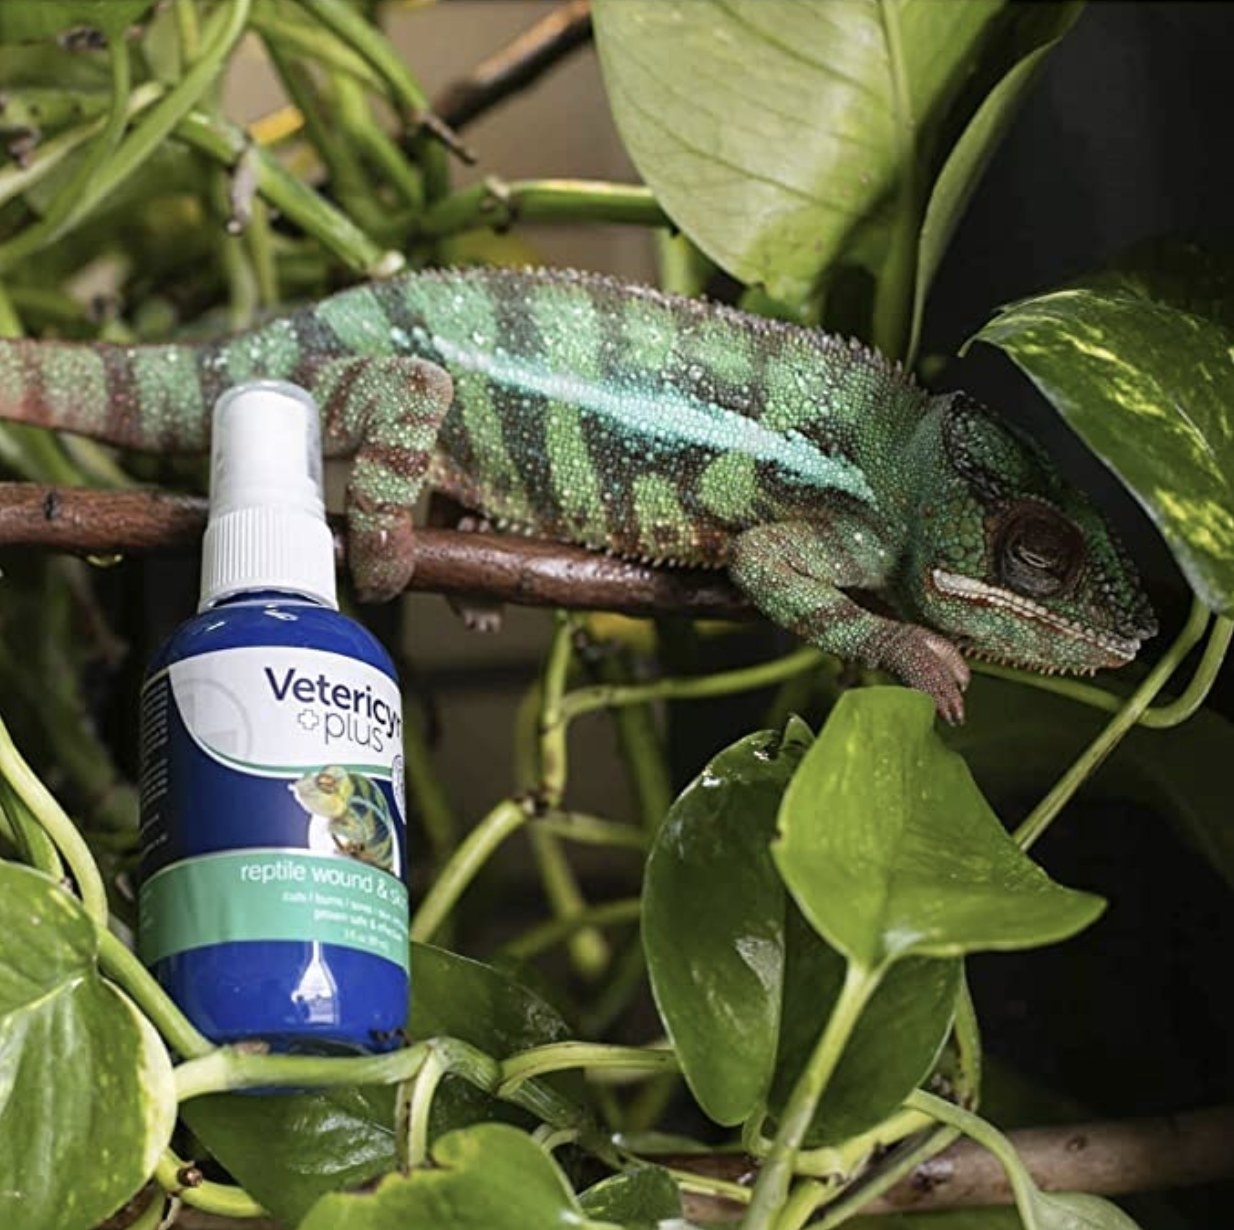 An image of a chameleon perched in foliage with a reptile wound bottle next to it